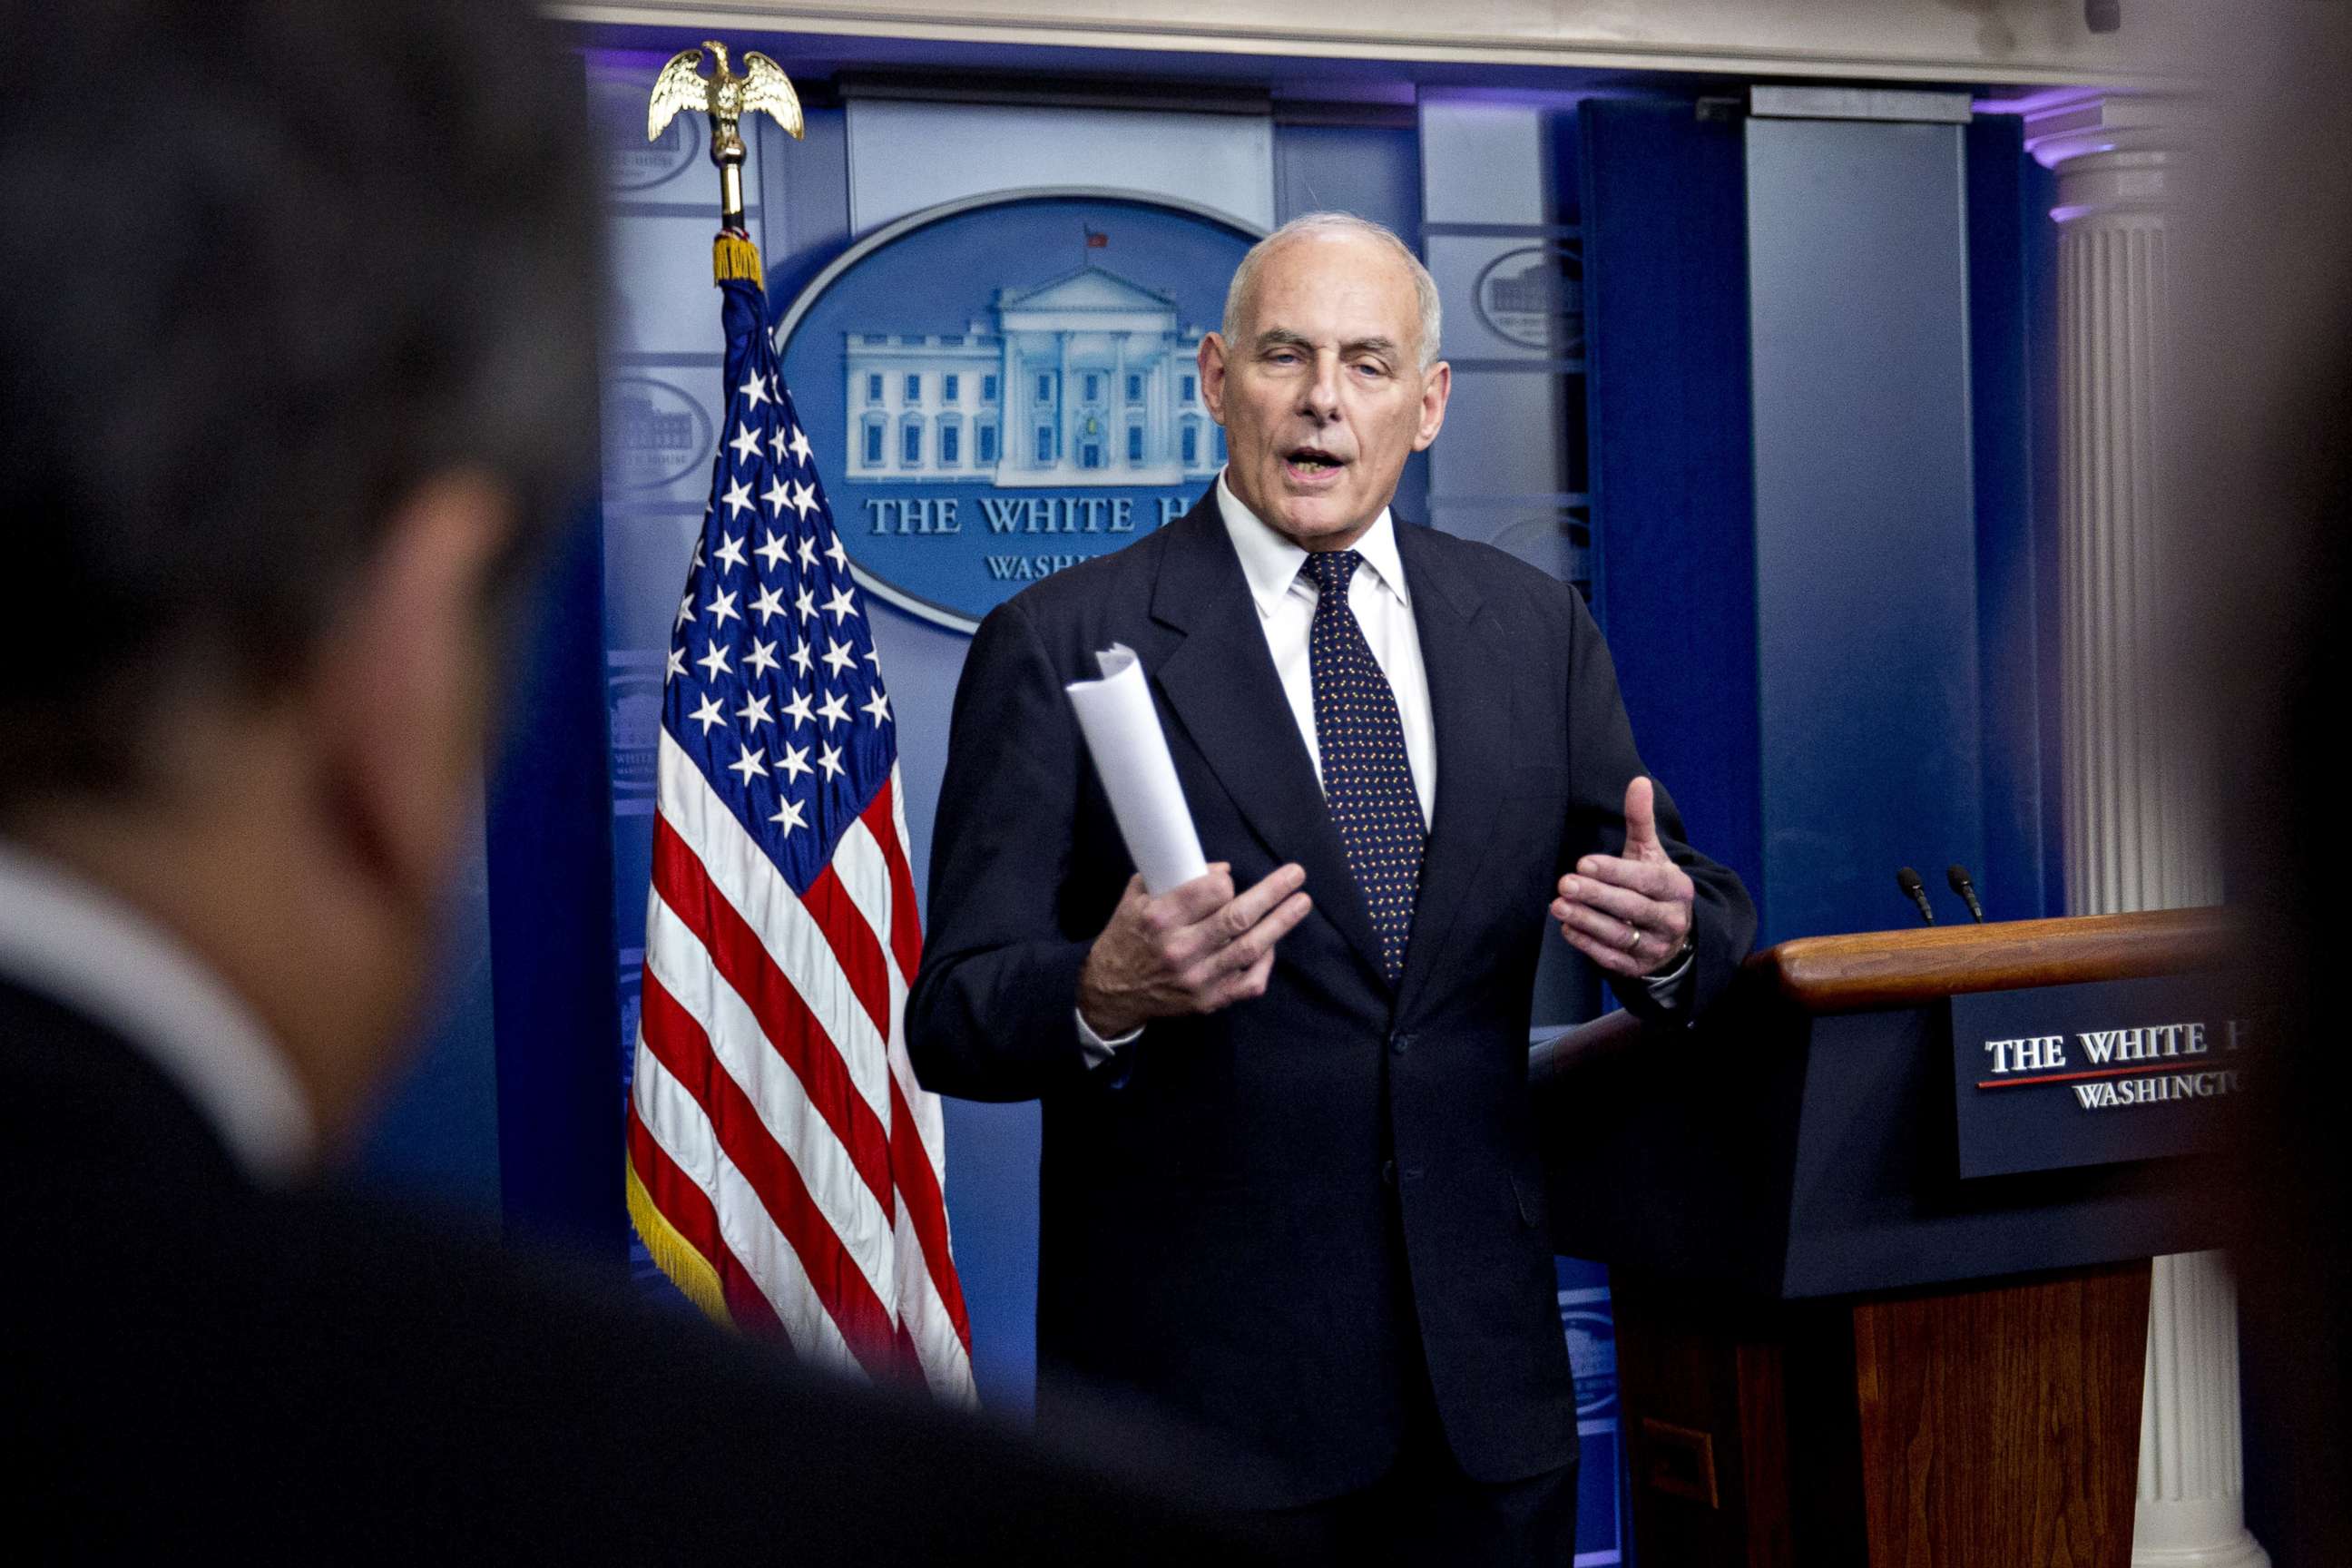 PHOTO: John Kelly, White House chief of staff, speaks during a White House briefing in Washington, Oct. 19, 2017